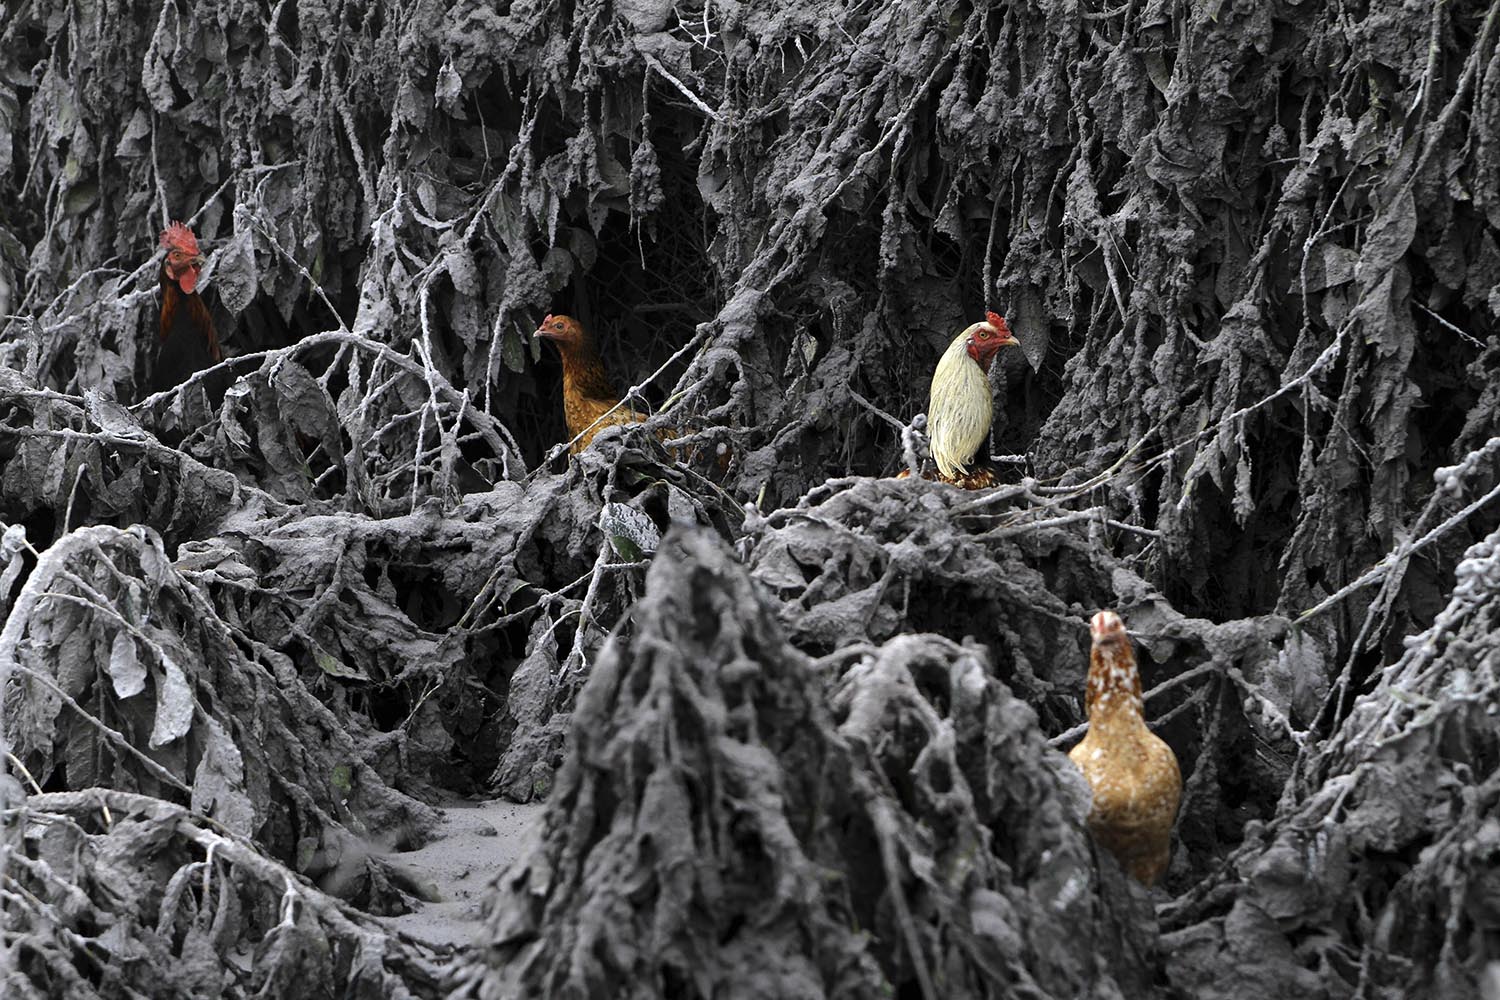 Chickens are seen in the midst of plants covered by ash from Mount Sinabung near Sigarang-Garang village